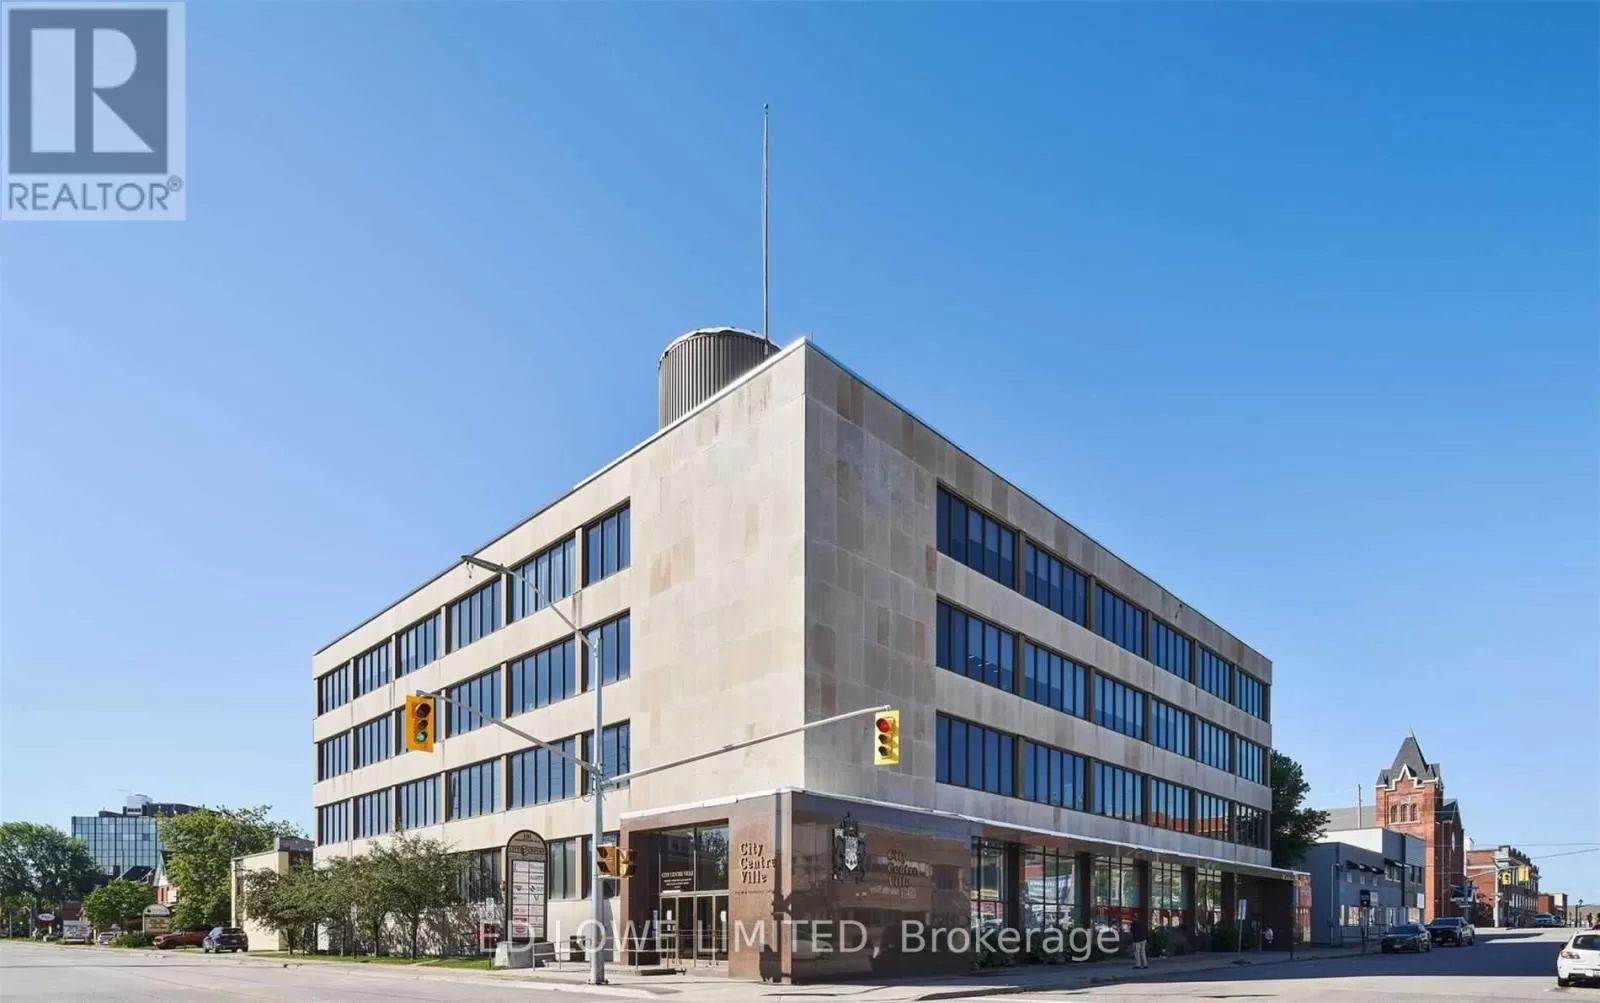 Offices for rent: #437 -101 Worthington St E, North Bay, Ontario P1B 1G5